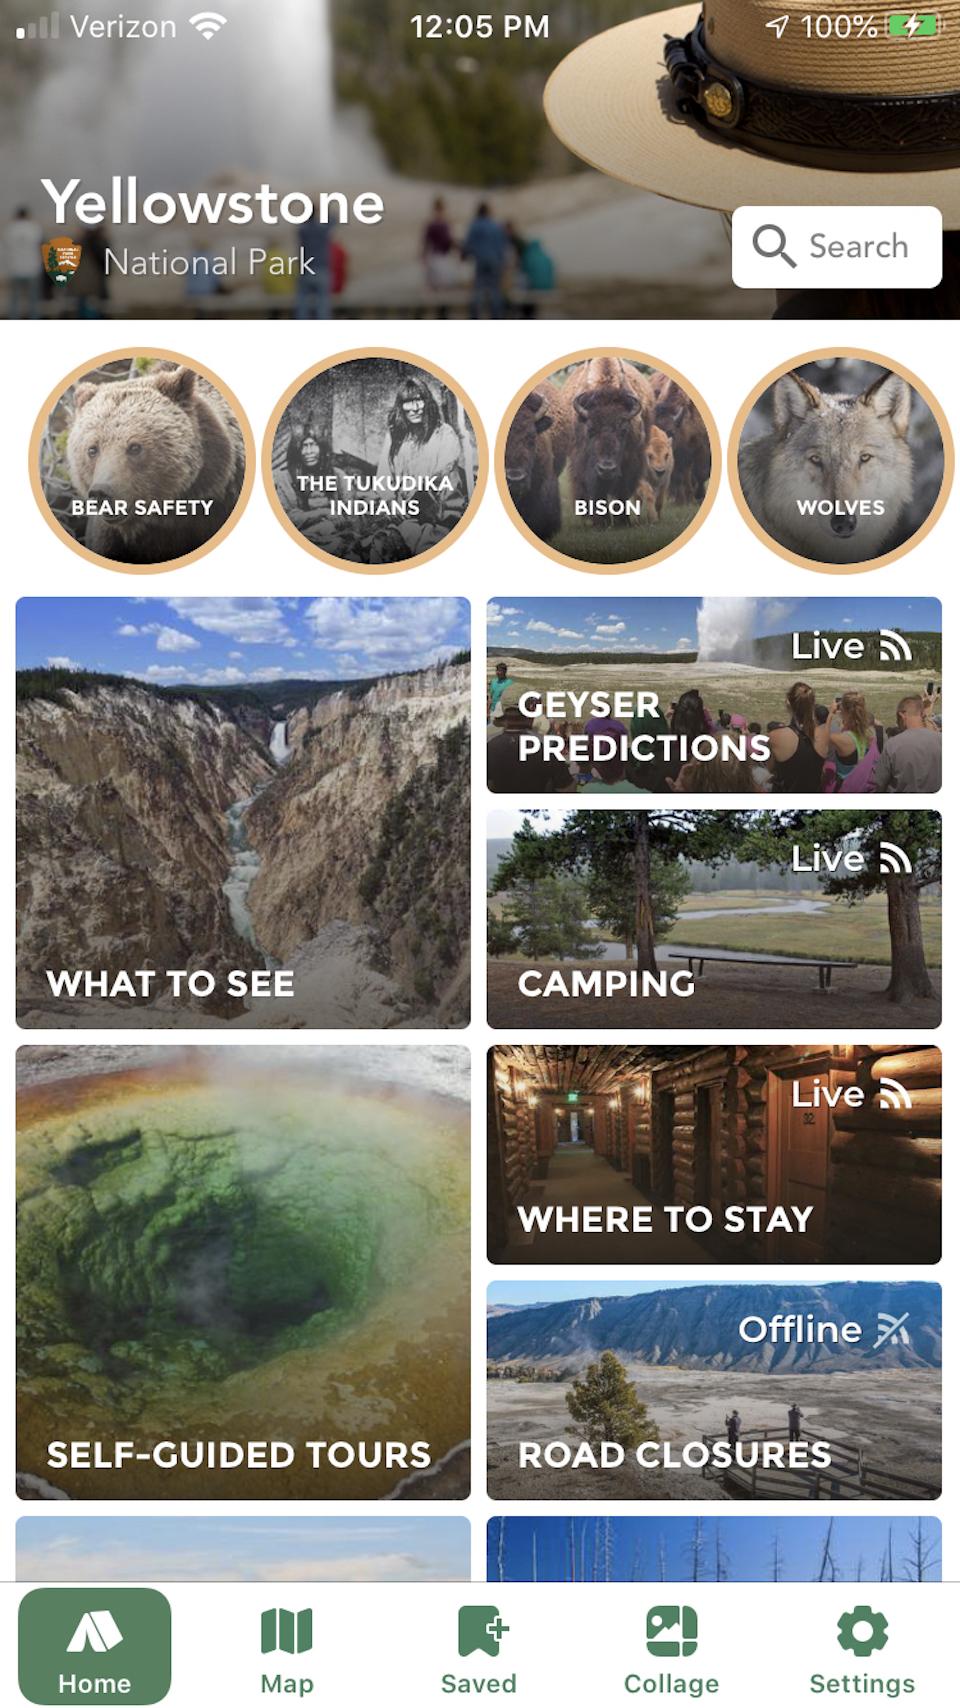 Yellowstone National Park has updated its app to help you explore the park.